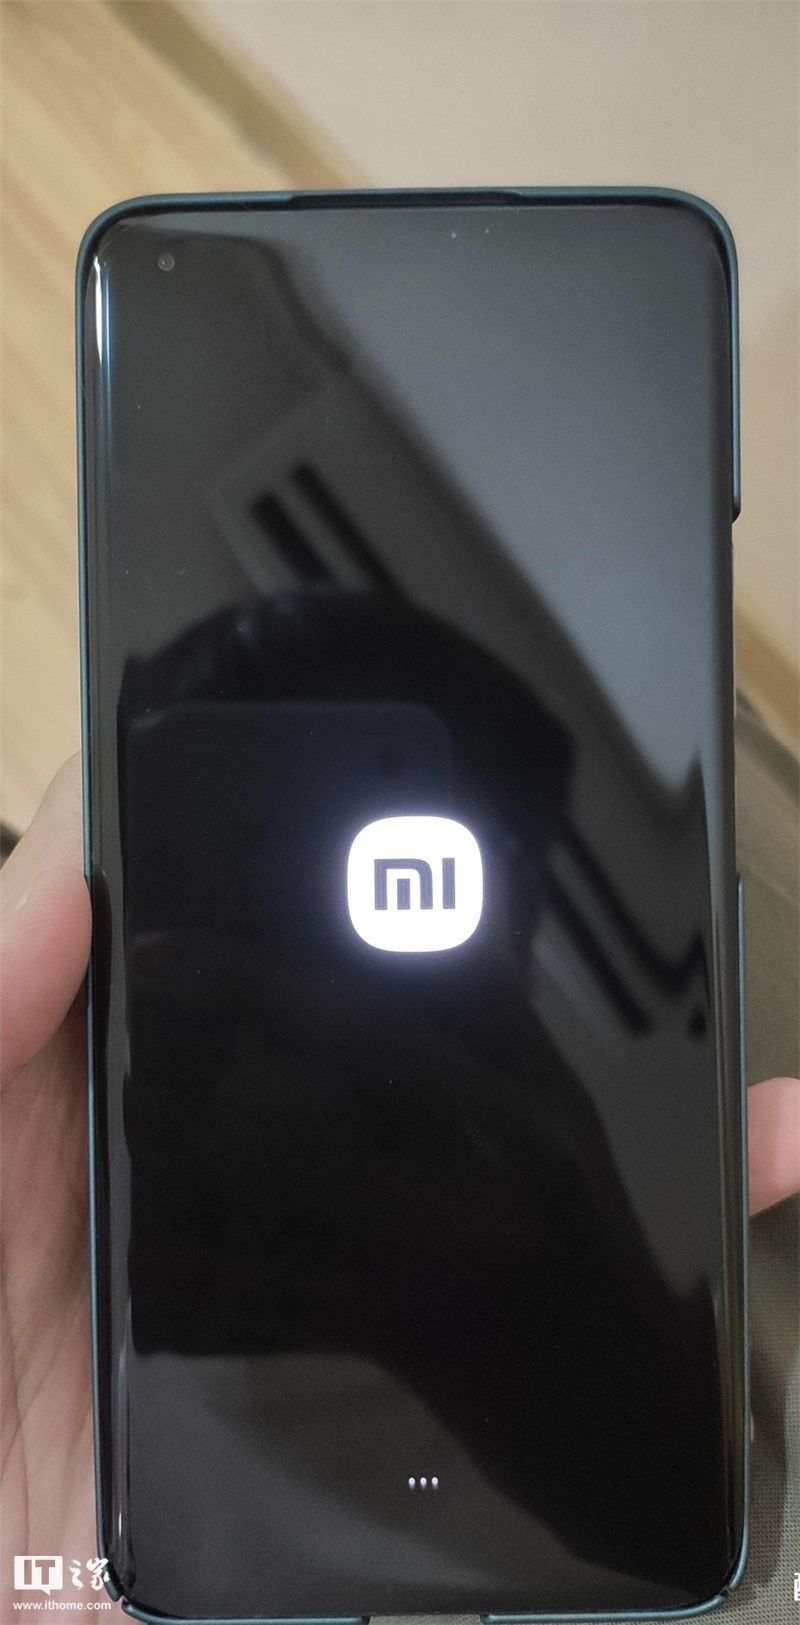 New boot animation and Mi Logo